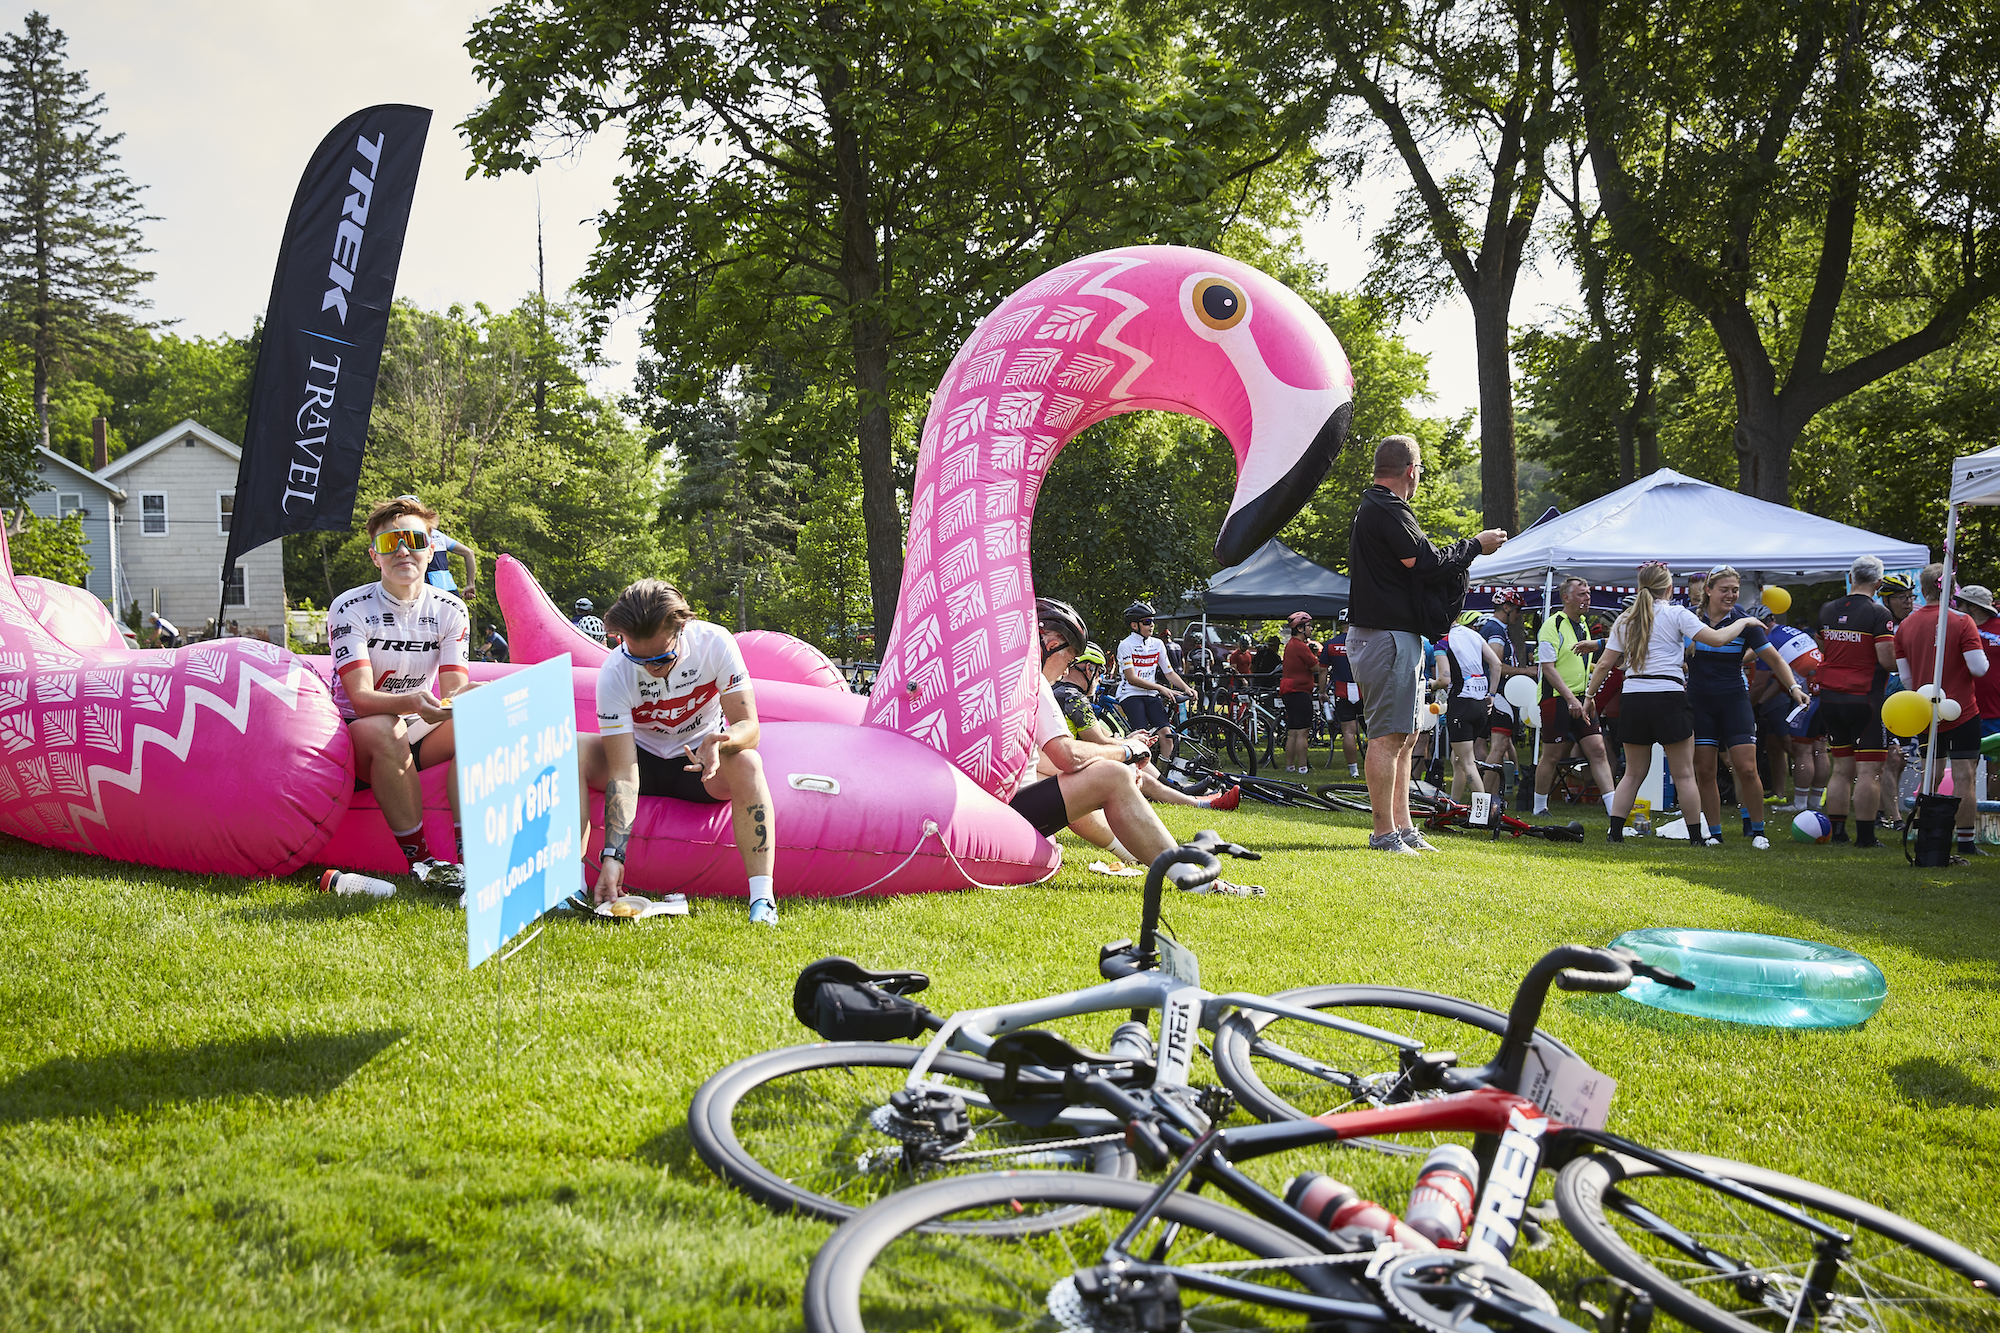 Large groups of people gathering at the Trek 100 with a large inflatable flamingo